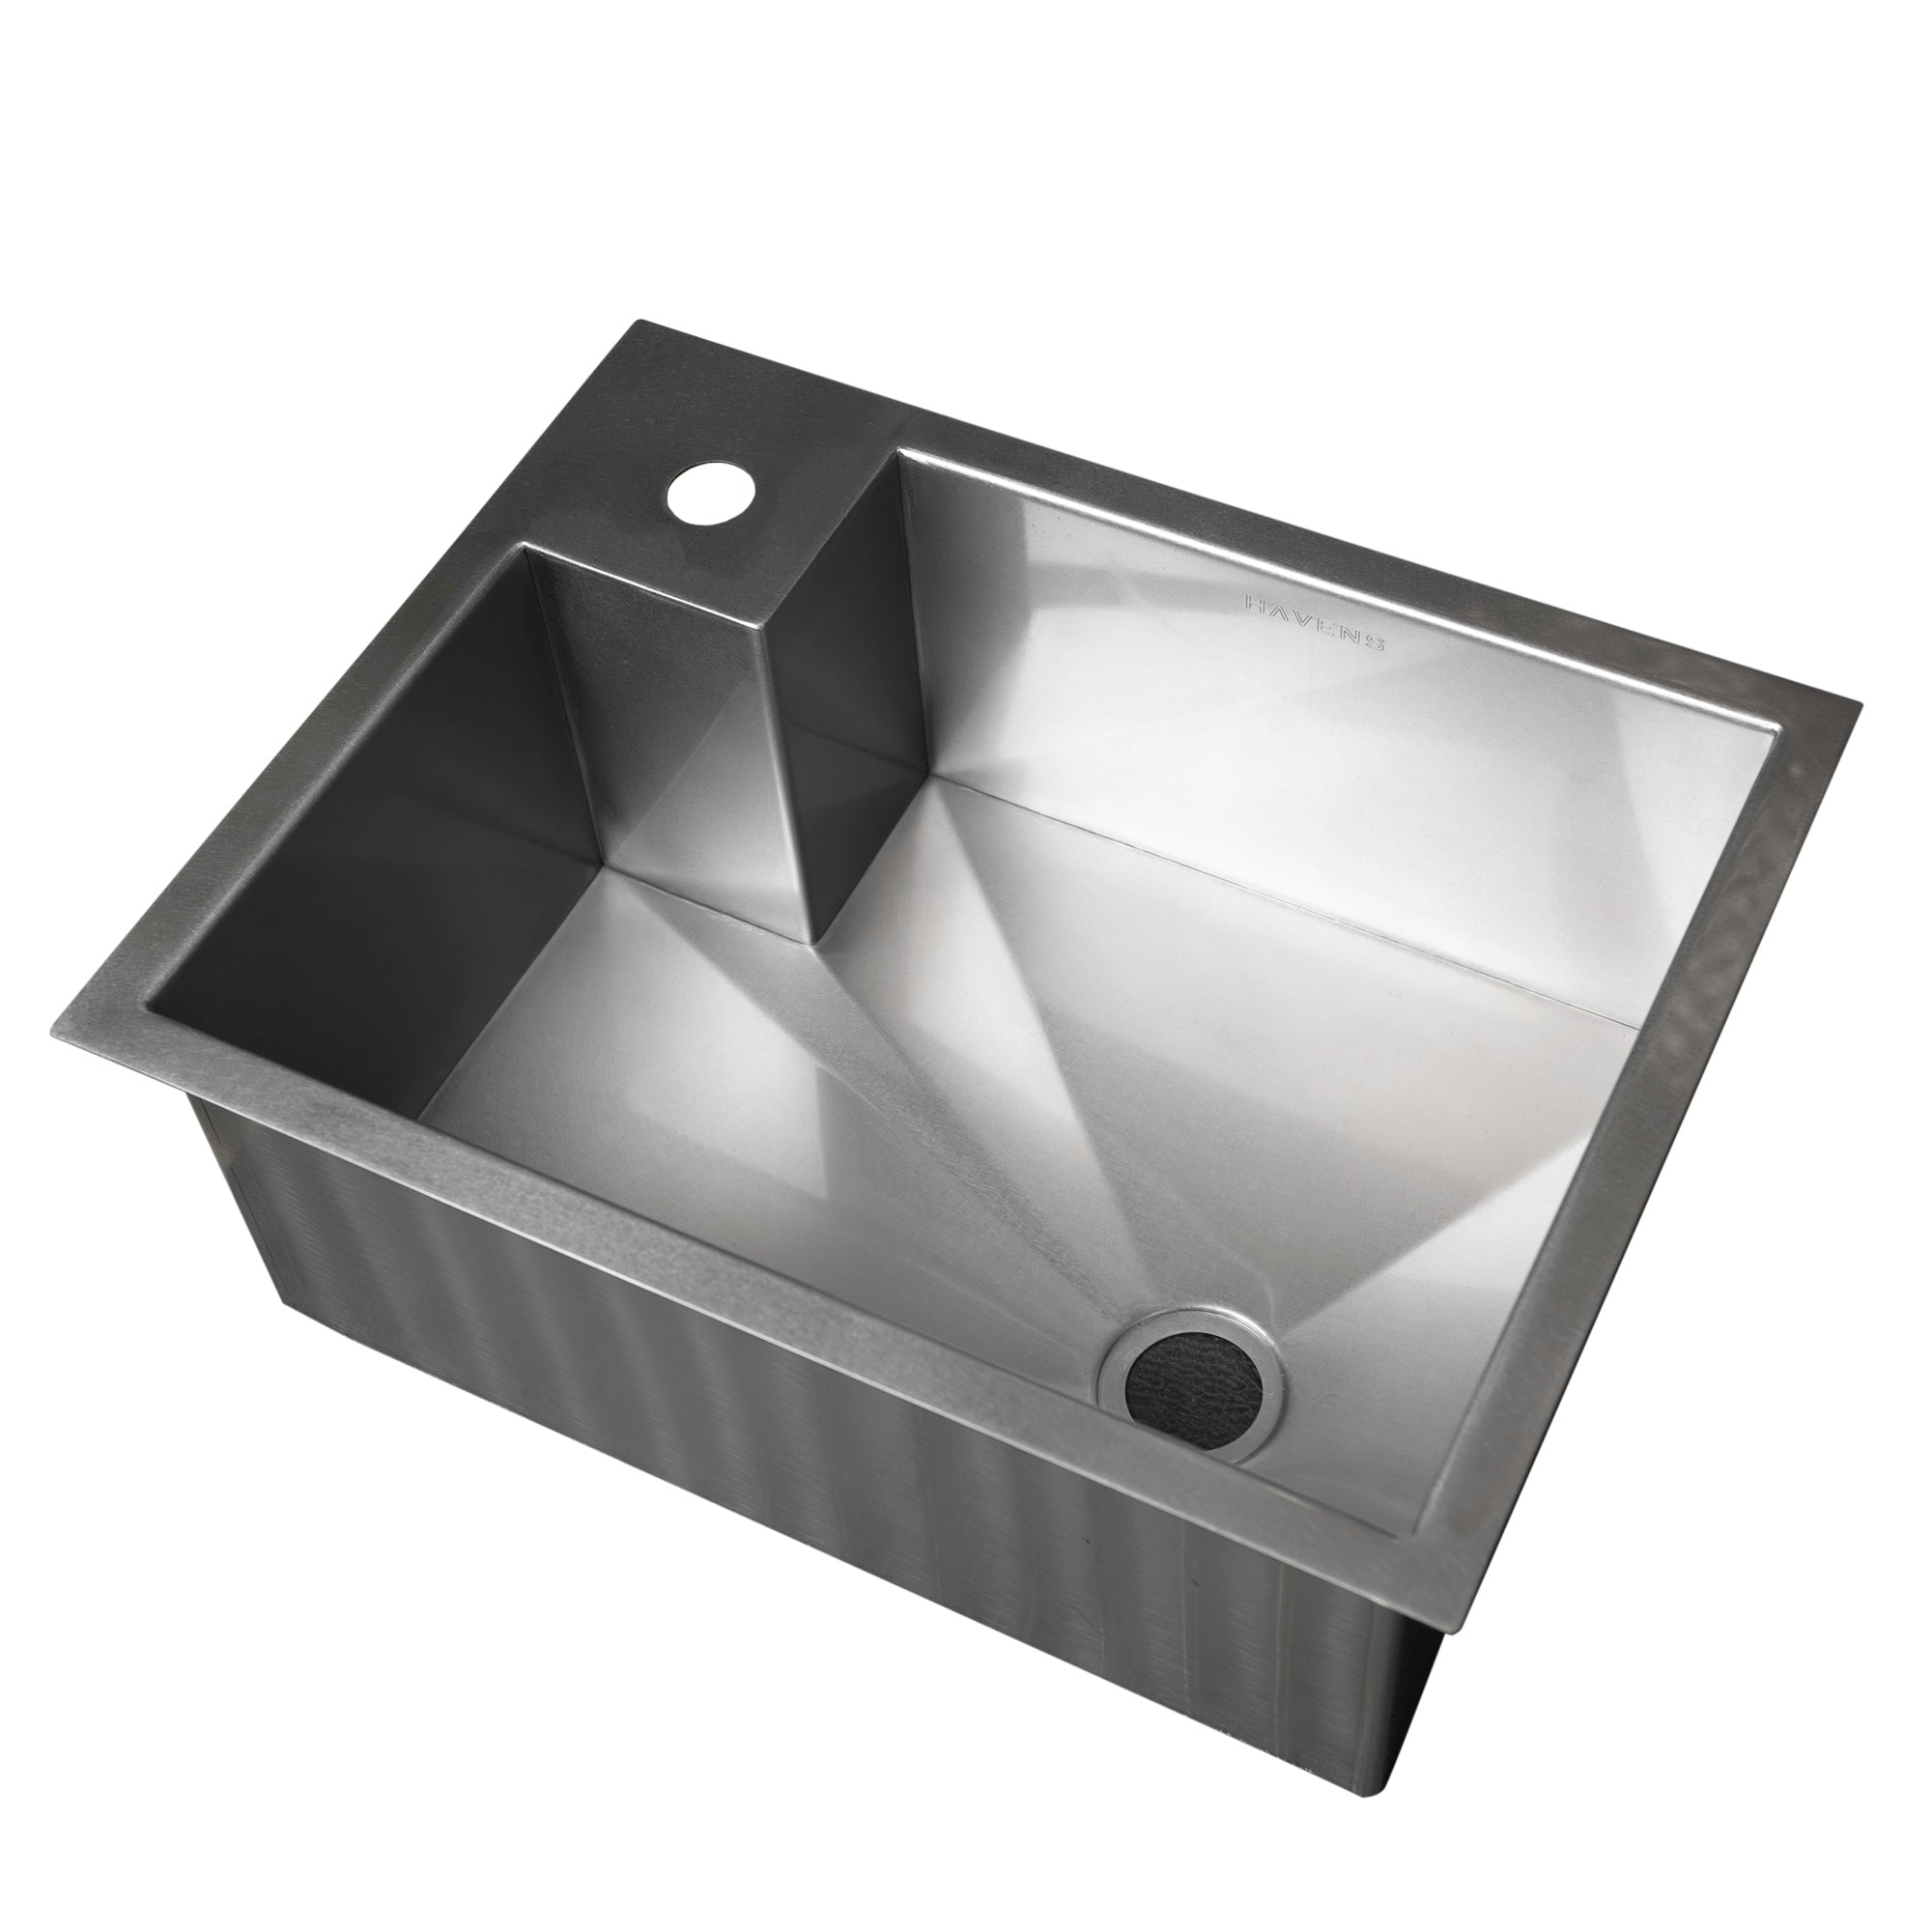 Element Sink - Stainless